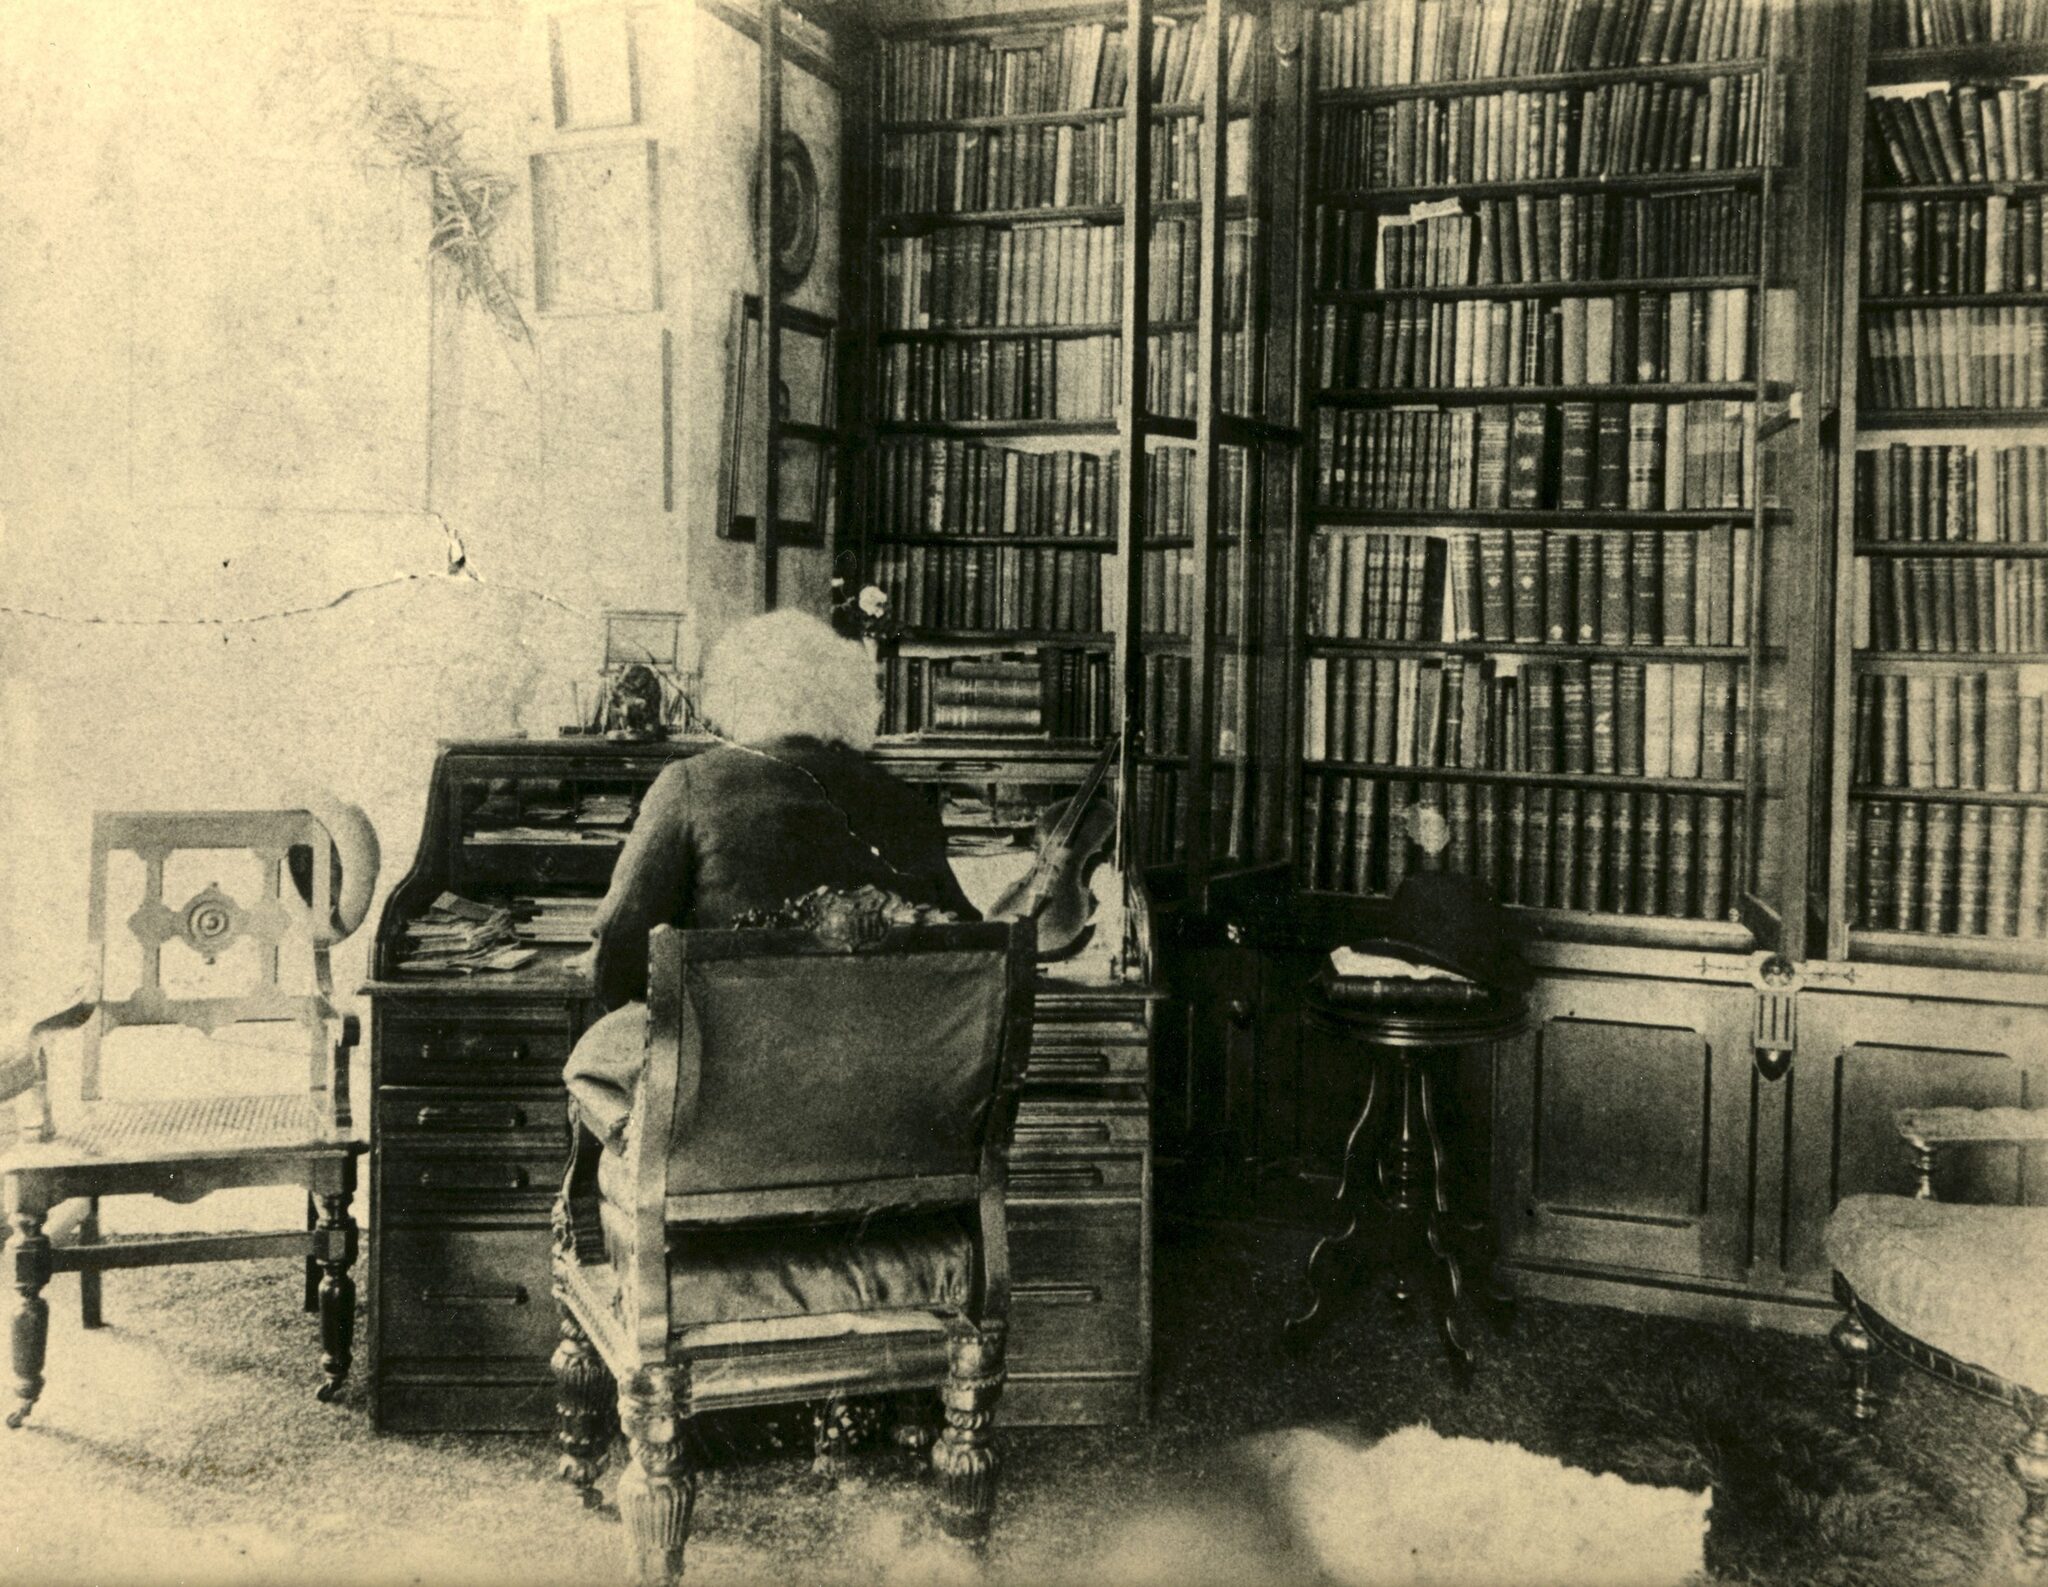 Sepia toned photograph of a man with white hair sitting at a desk in a library.